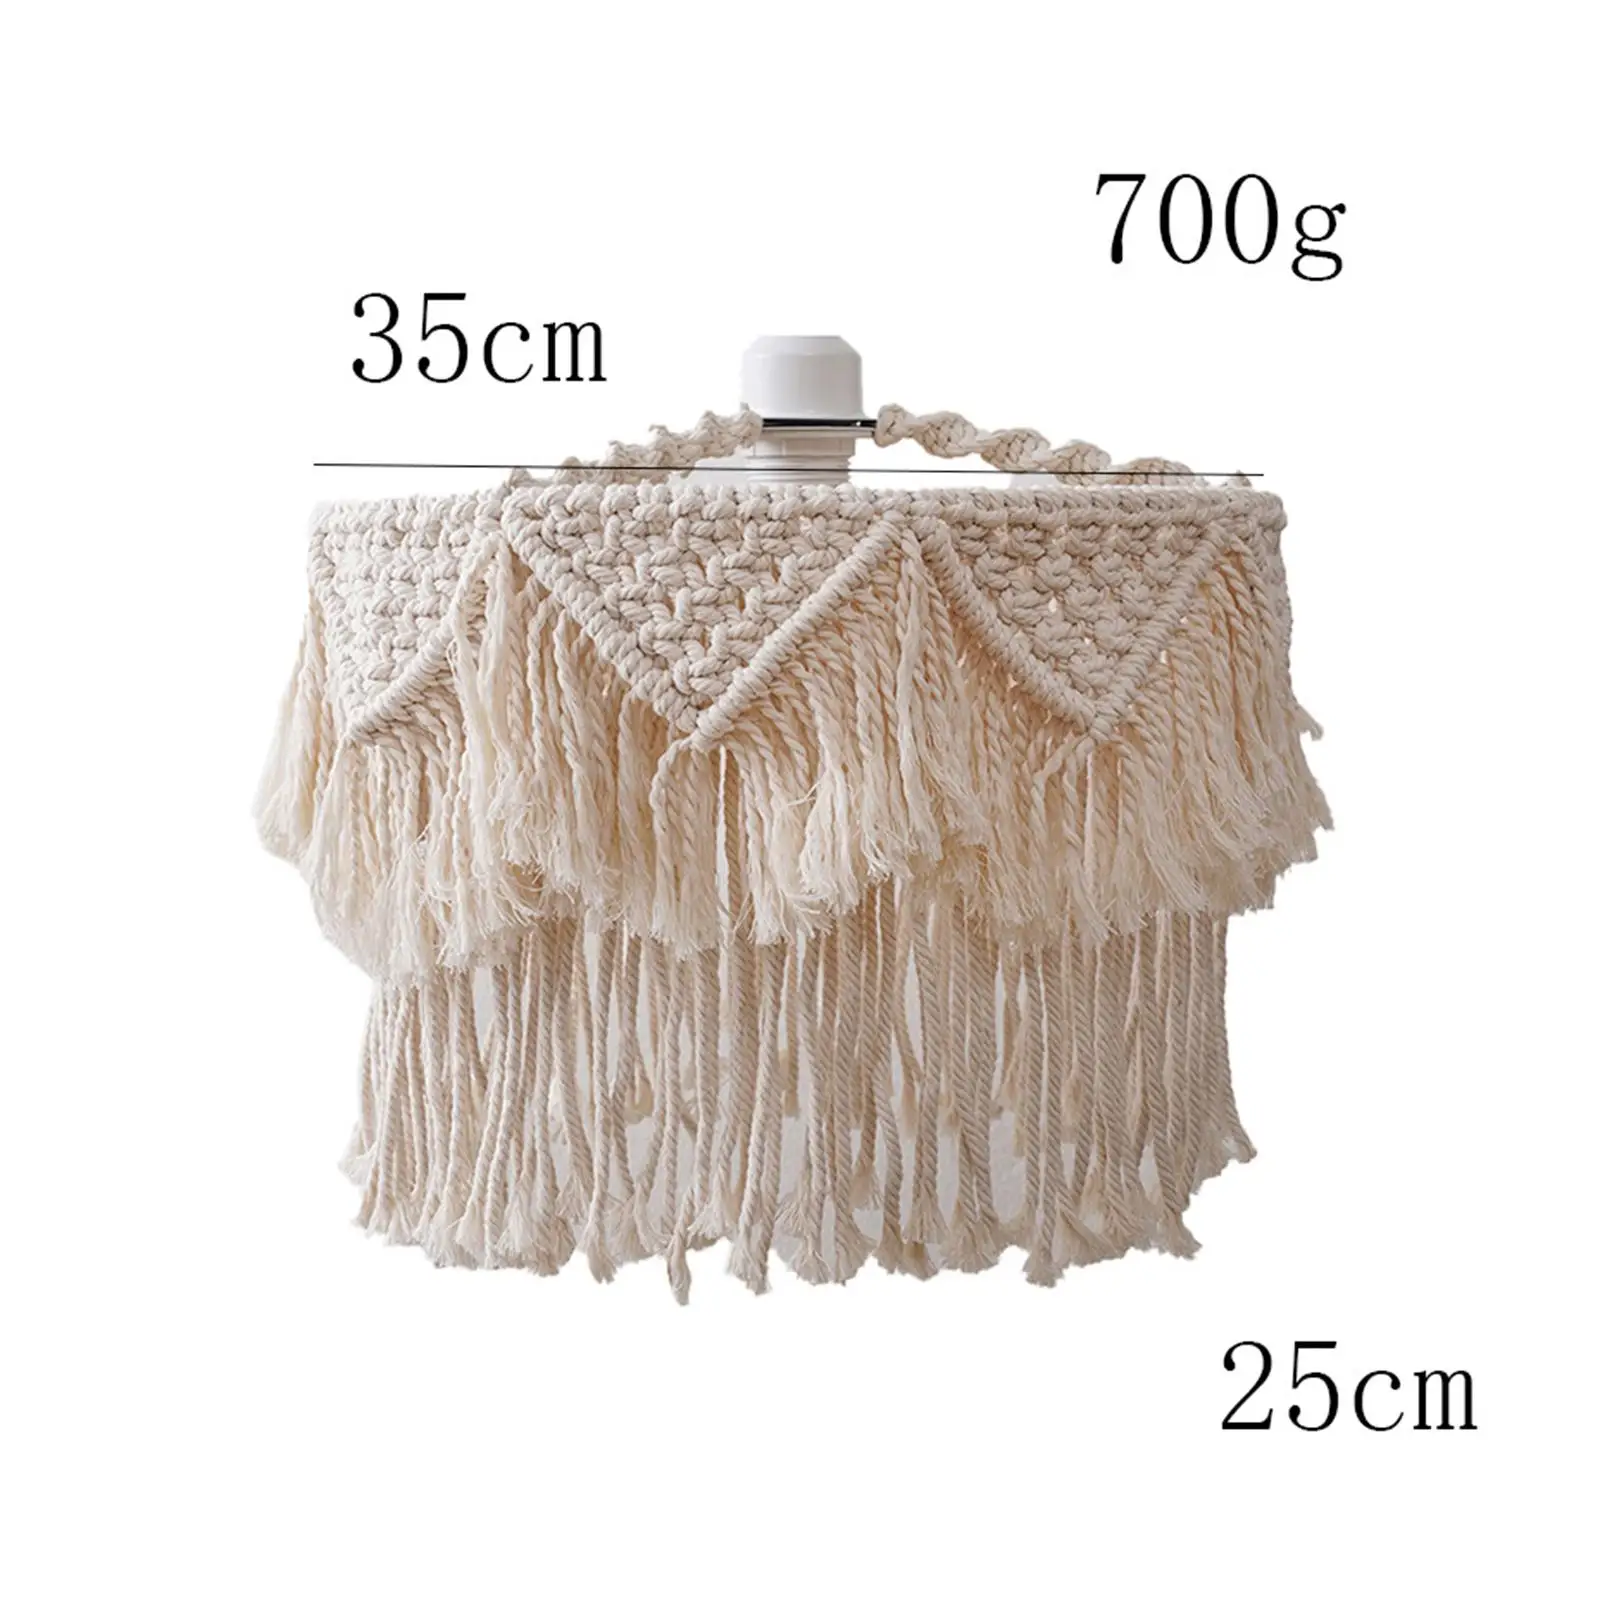 Macrame Lamp Shade Handmade Woven Hanging Lampshade for Wedding Party Home